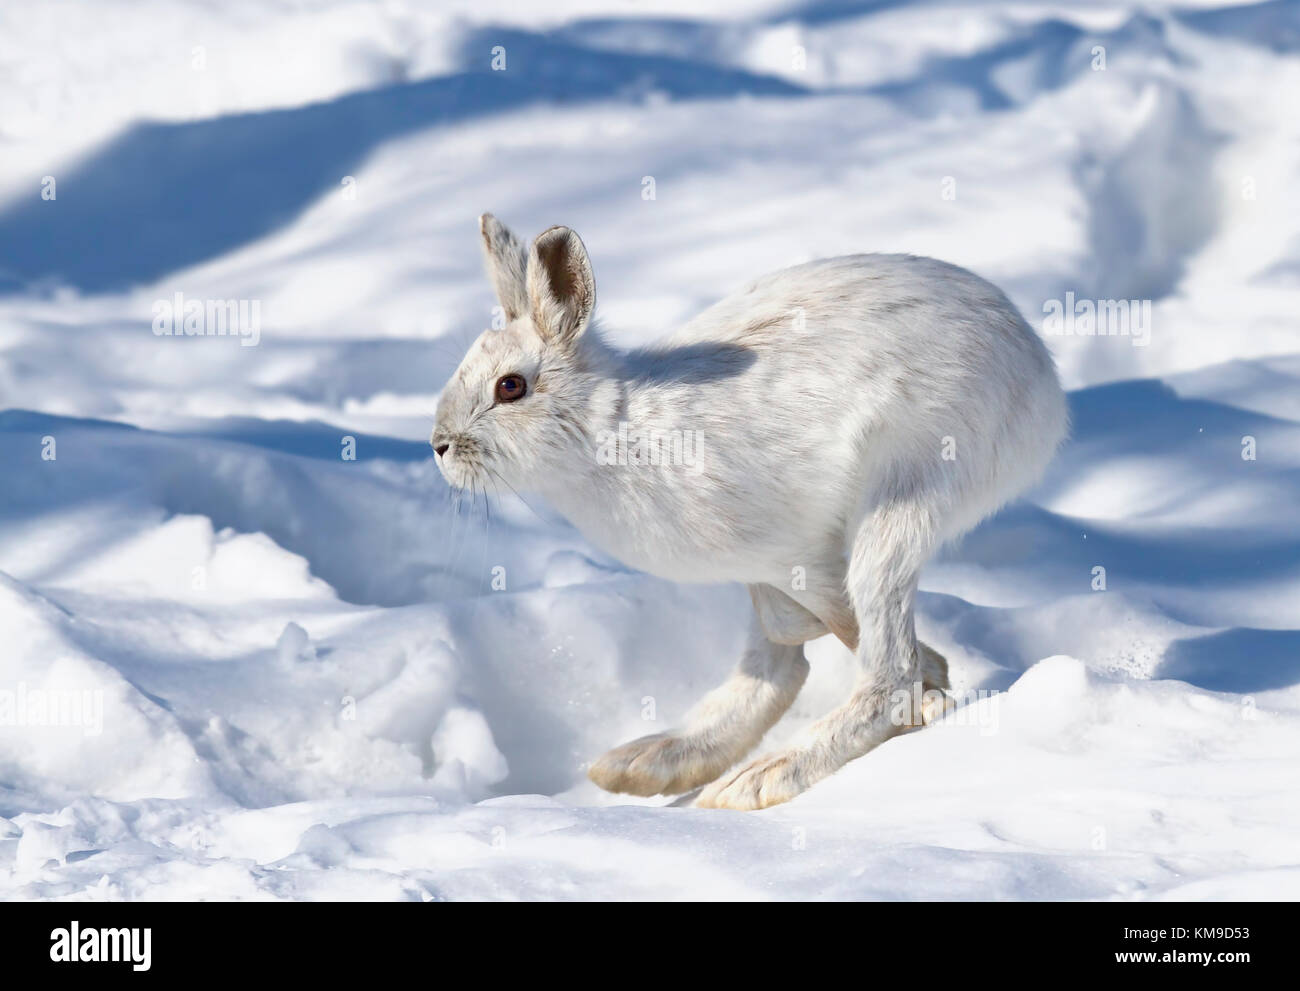 Snowshoe hare or Varying hare (Lepus americanus) running in the winter snow in Canada Stock Photo